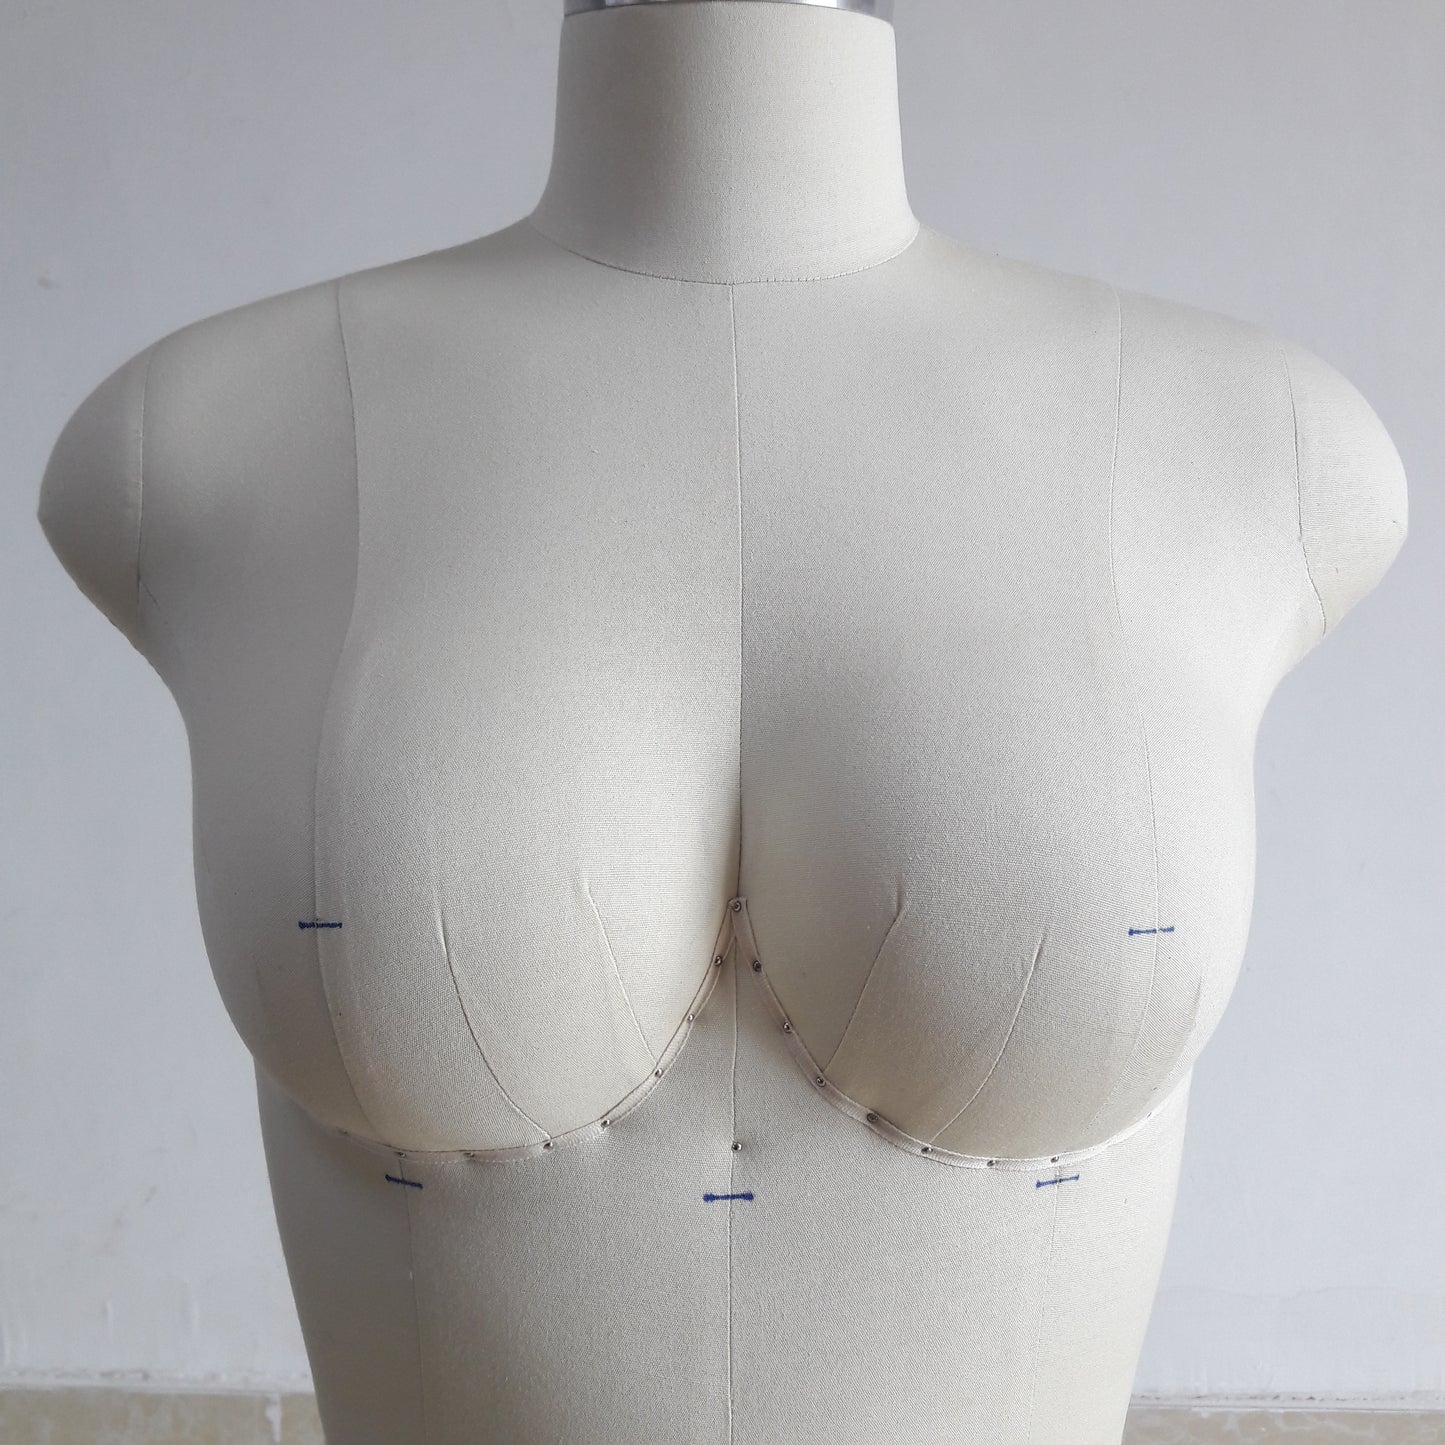 DL900 36B Female Mannequin, Lingerie Swimming Tailor Model for sewing, Half Body Adult  Full High Quality Dressmaker Dummy By sea DE-LIANG